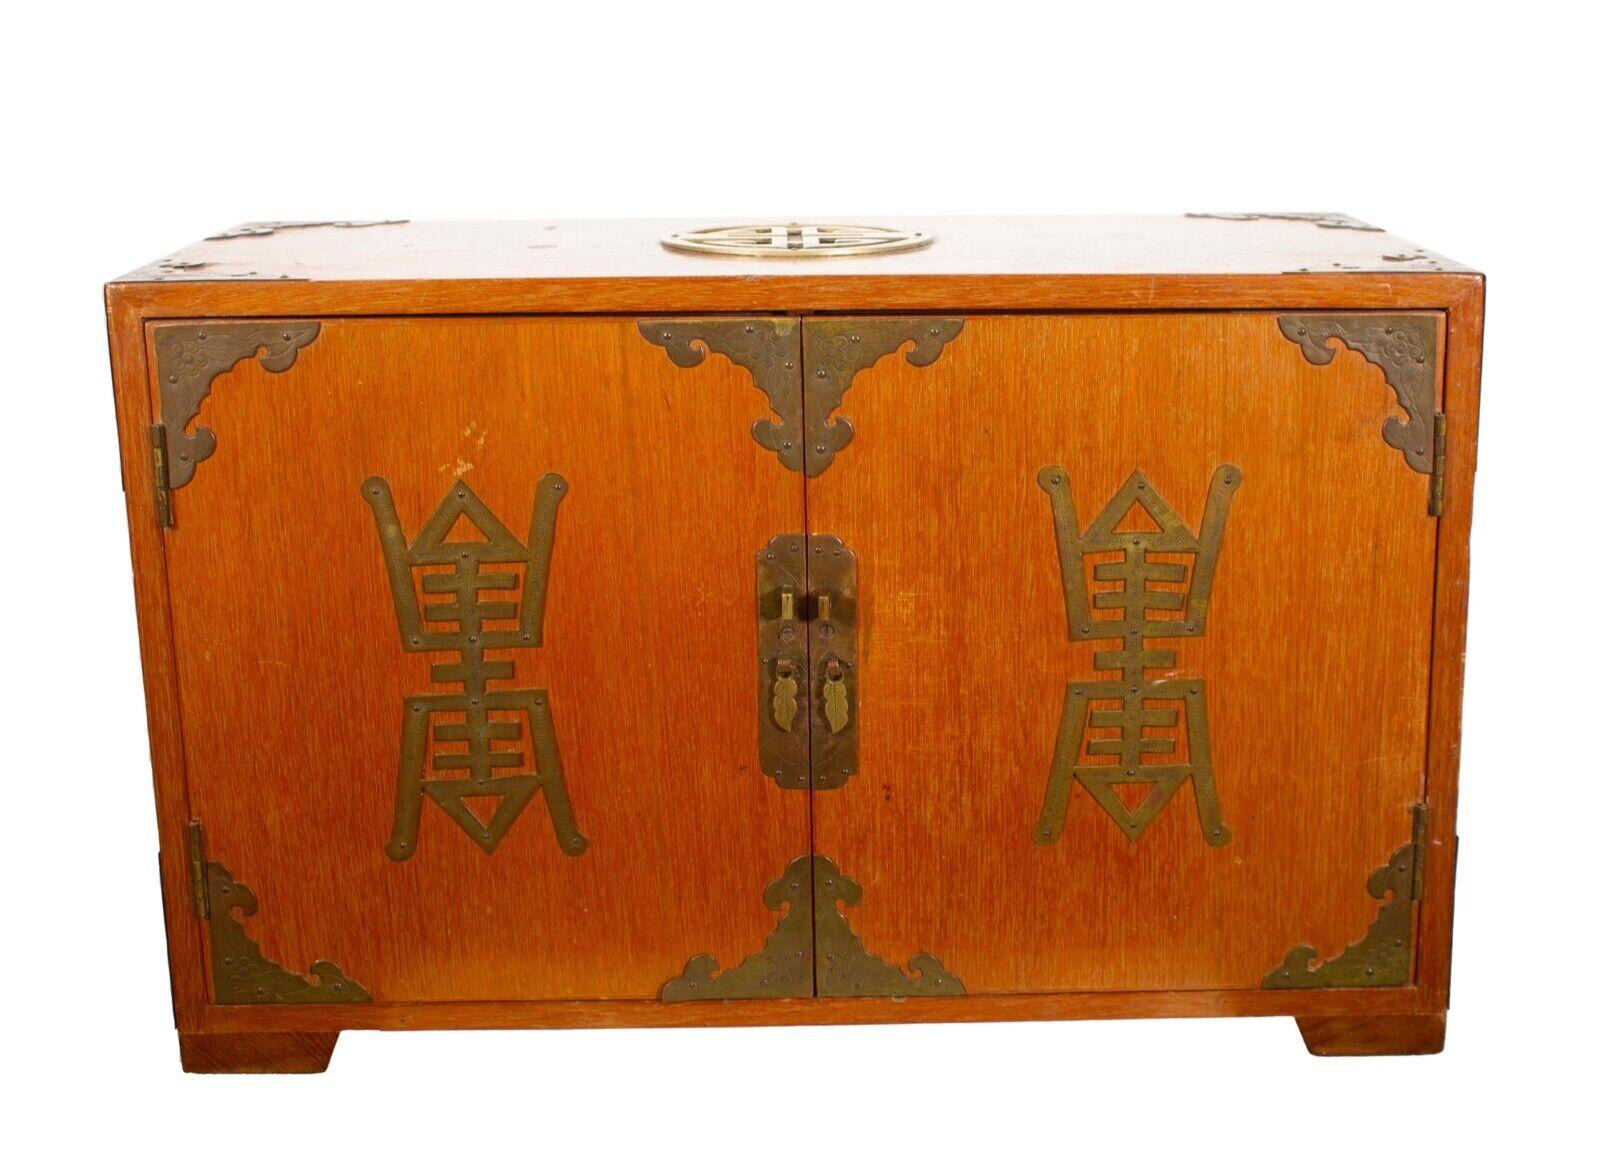 An elegant antique Asian wood box with brass ornate details. Doors with ornate handles open to six inner drawers. Each drawer is also decorated with ornate brass details with handles. Each drawer is lined. Could be used for jewelry storage or for